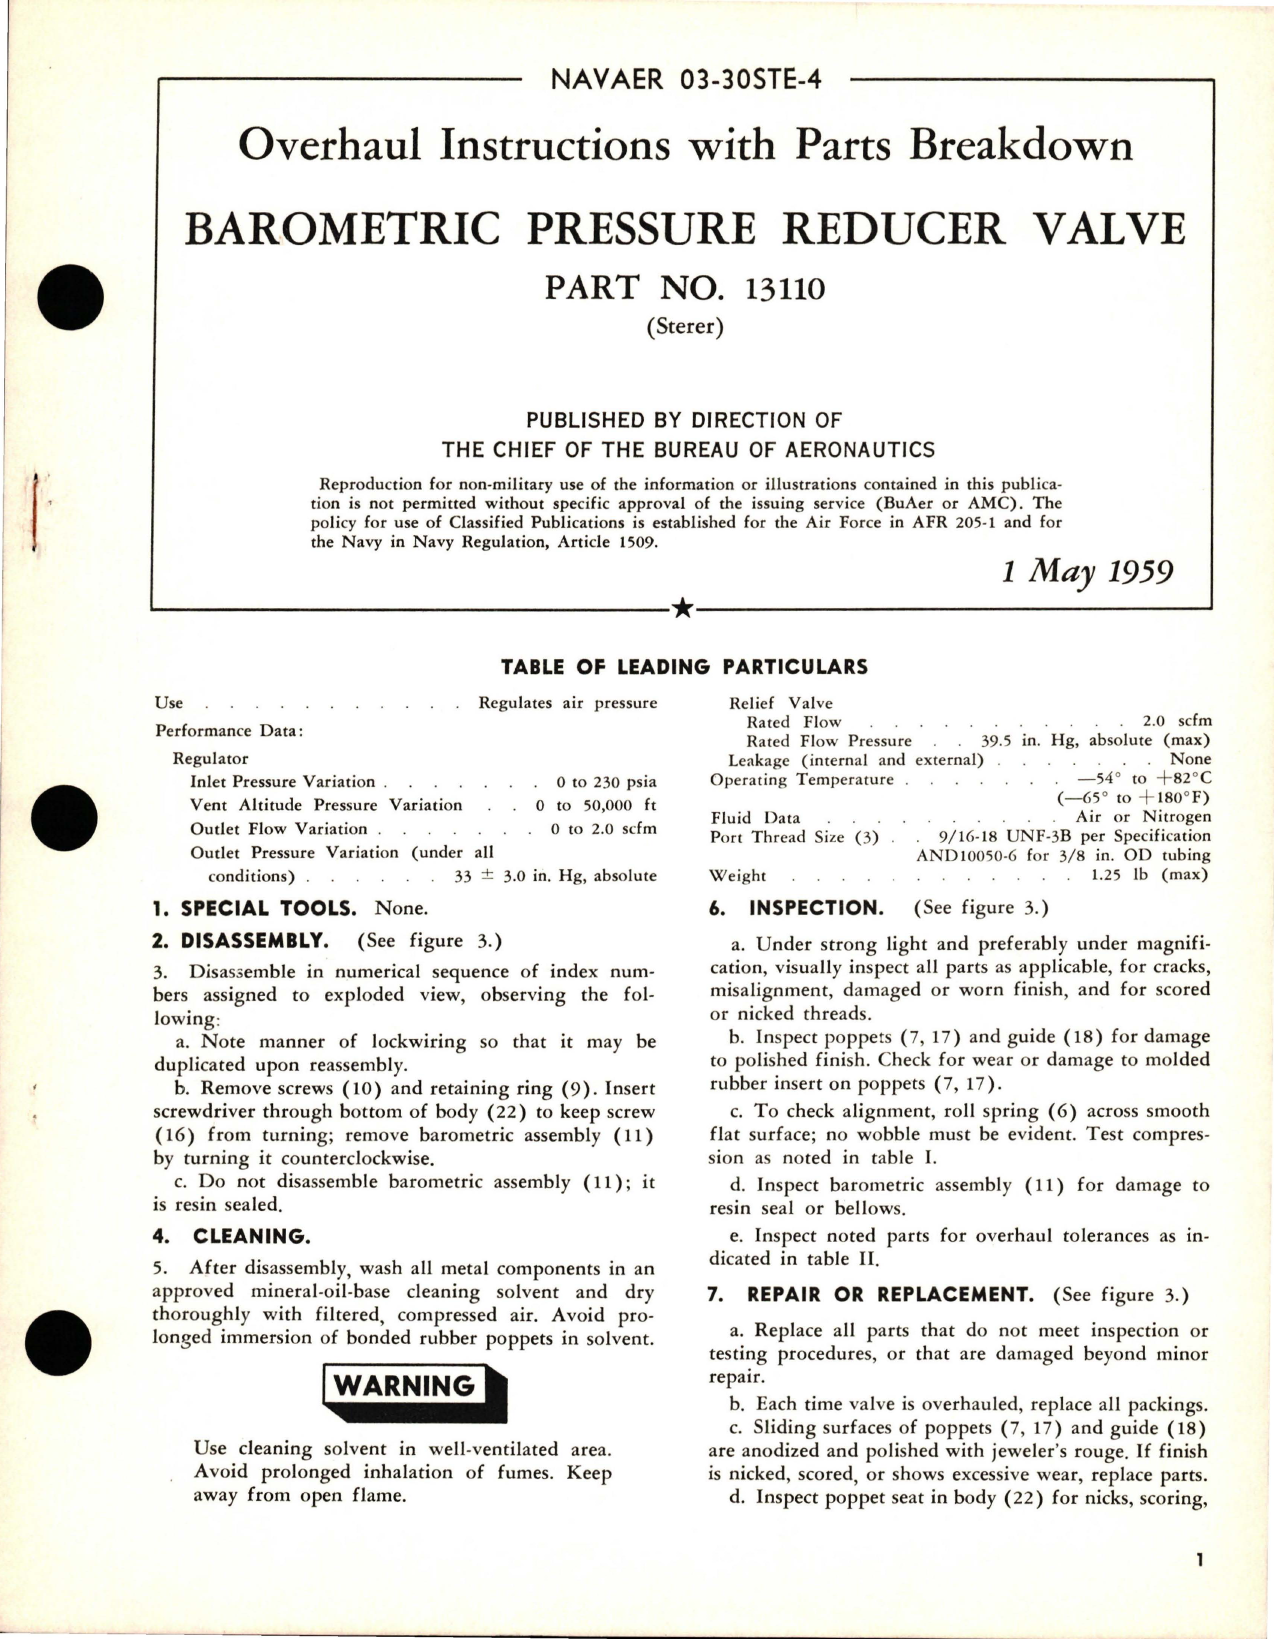 Sample page 1 from AirCorps Library document: Overhaul Instructions with Parts Breakdown for Barometric Pressure Reducer Valve - Part 13110